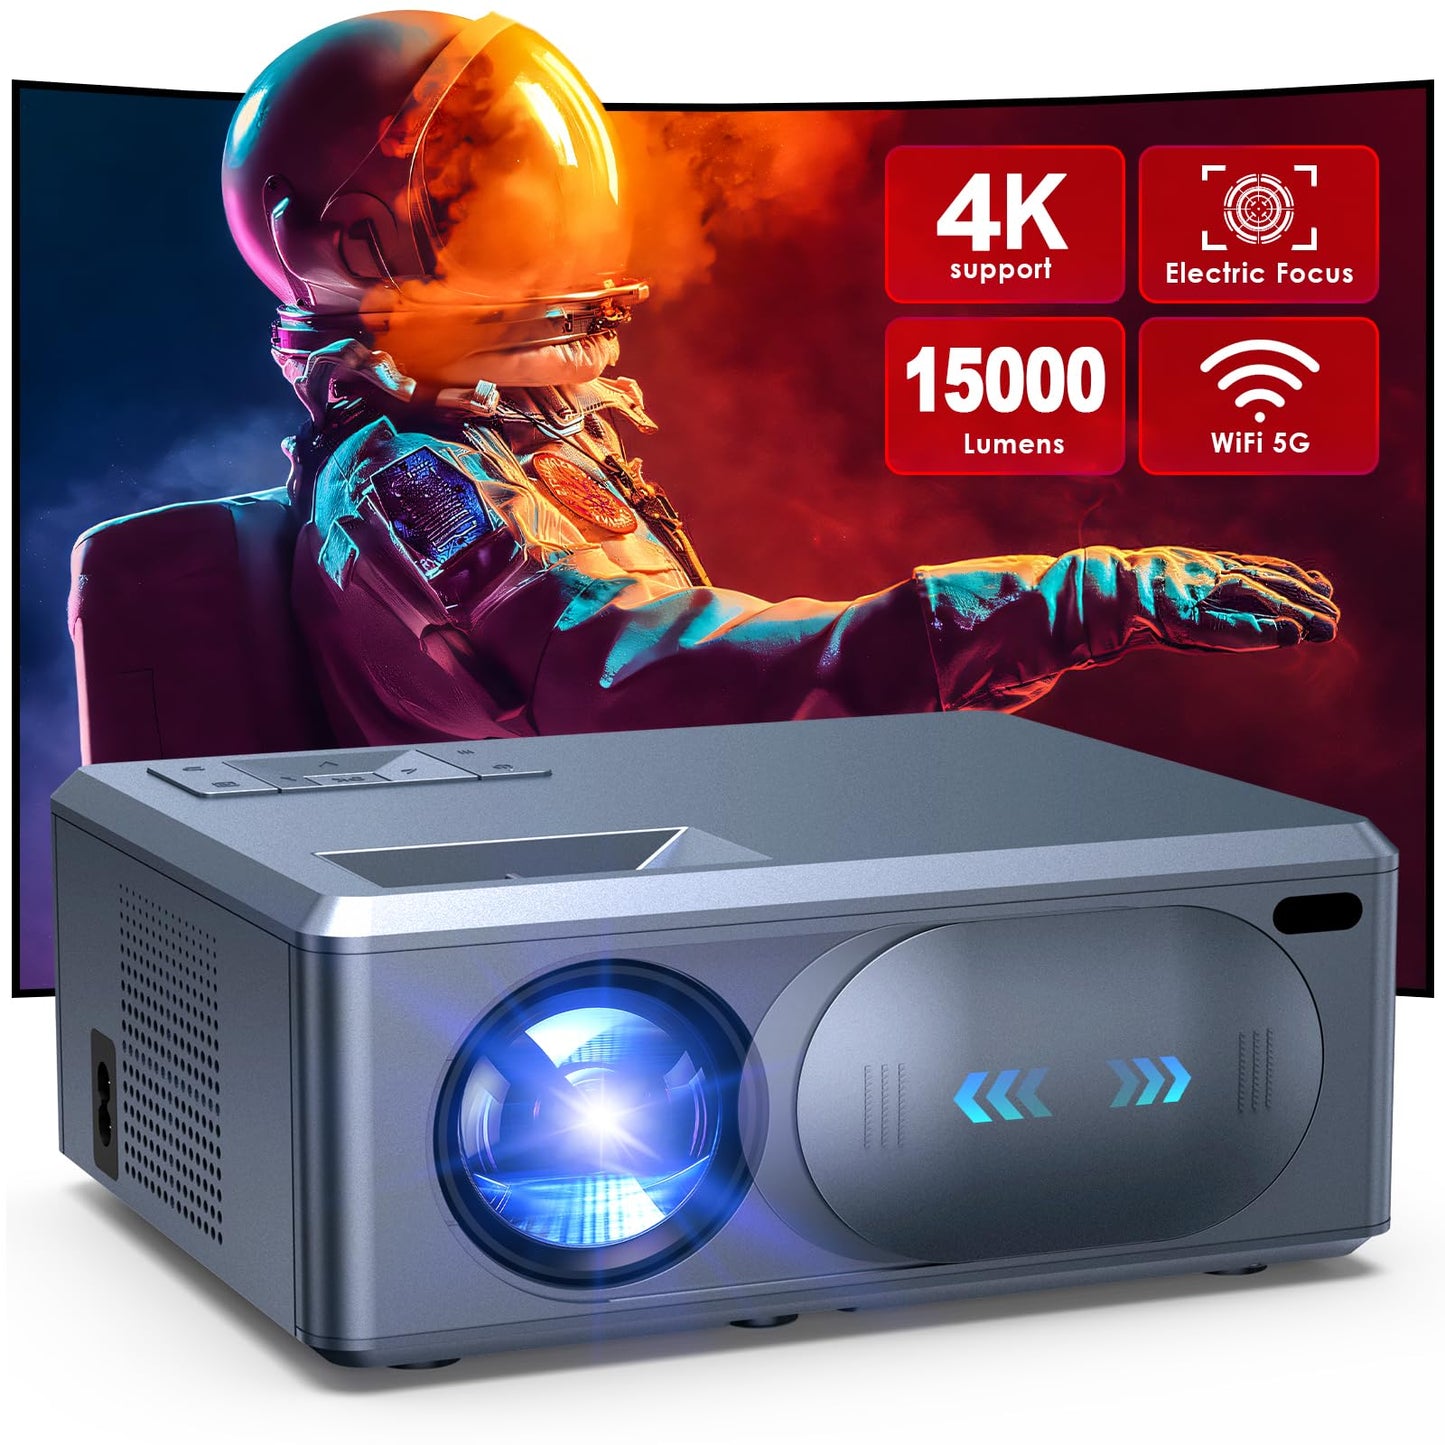 [Electric Focus] 4K Projector with 5G WiFi and Bluetooth, 15000L JOWLURK Mini Portable Projector, Outdoor Movie Projector, Home Theater Projector for iPhone/Android/TV Stick/HDMI/USB/Laptop/DVD/PS5